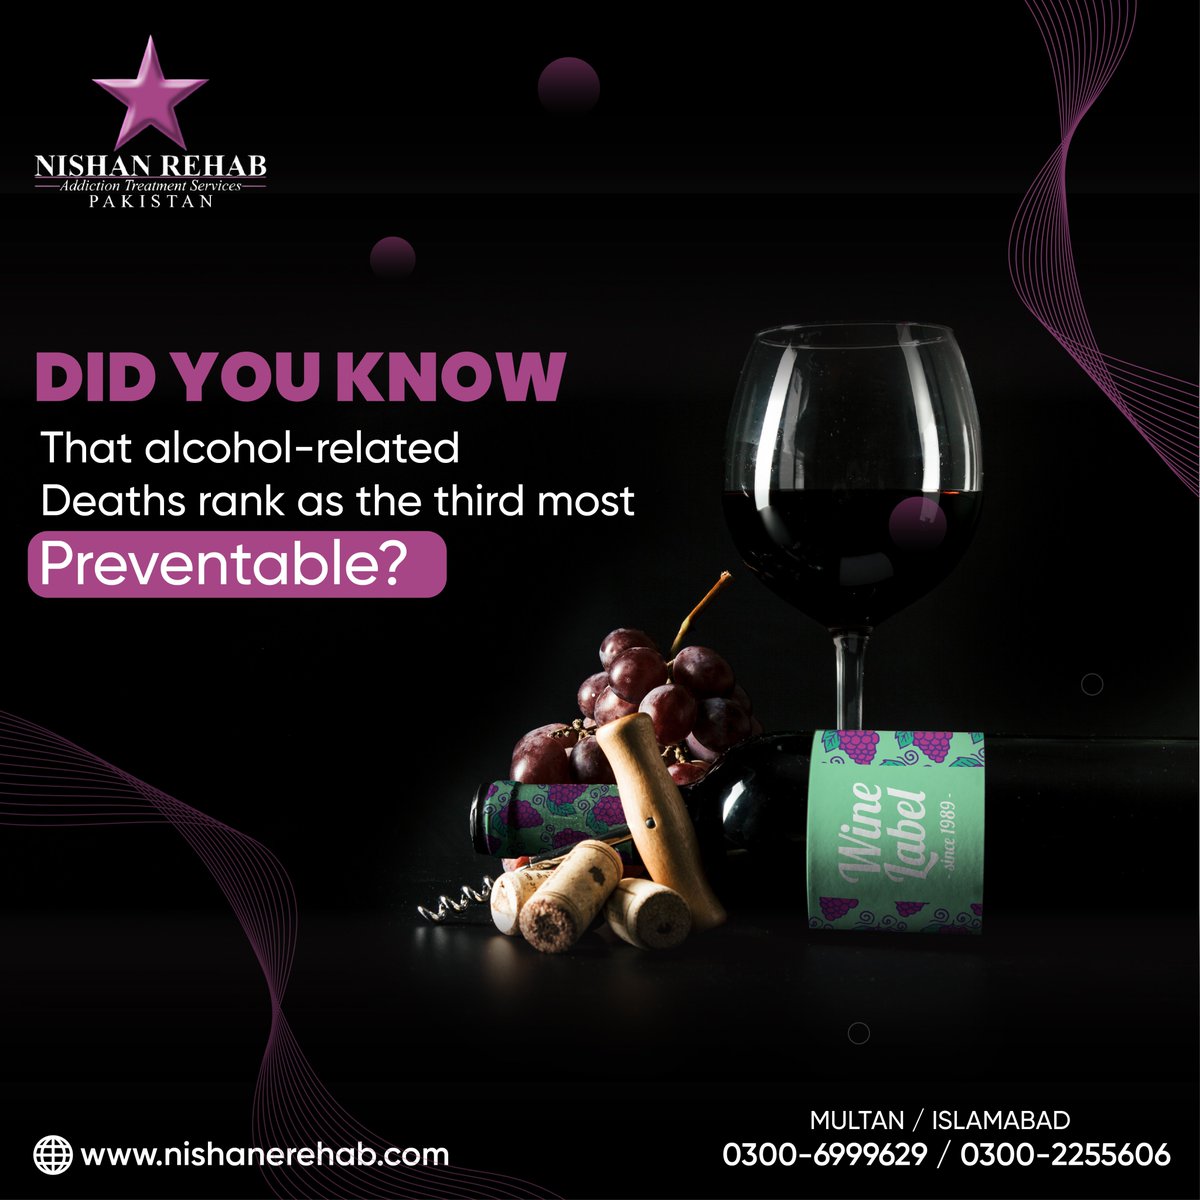 Alcohol ranks as the third leading cause of preventable death, highlighting the importance of awareness🎺 and moderation. 
#alcoholism #addictionrecovery #addictionawareness #recoveryispossible #Nishanrehab #soberlife #alcoholfree #mentalhealth